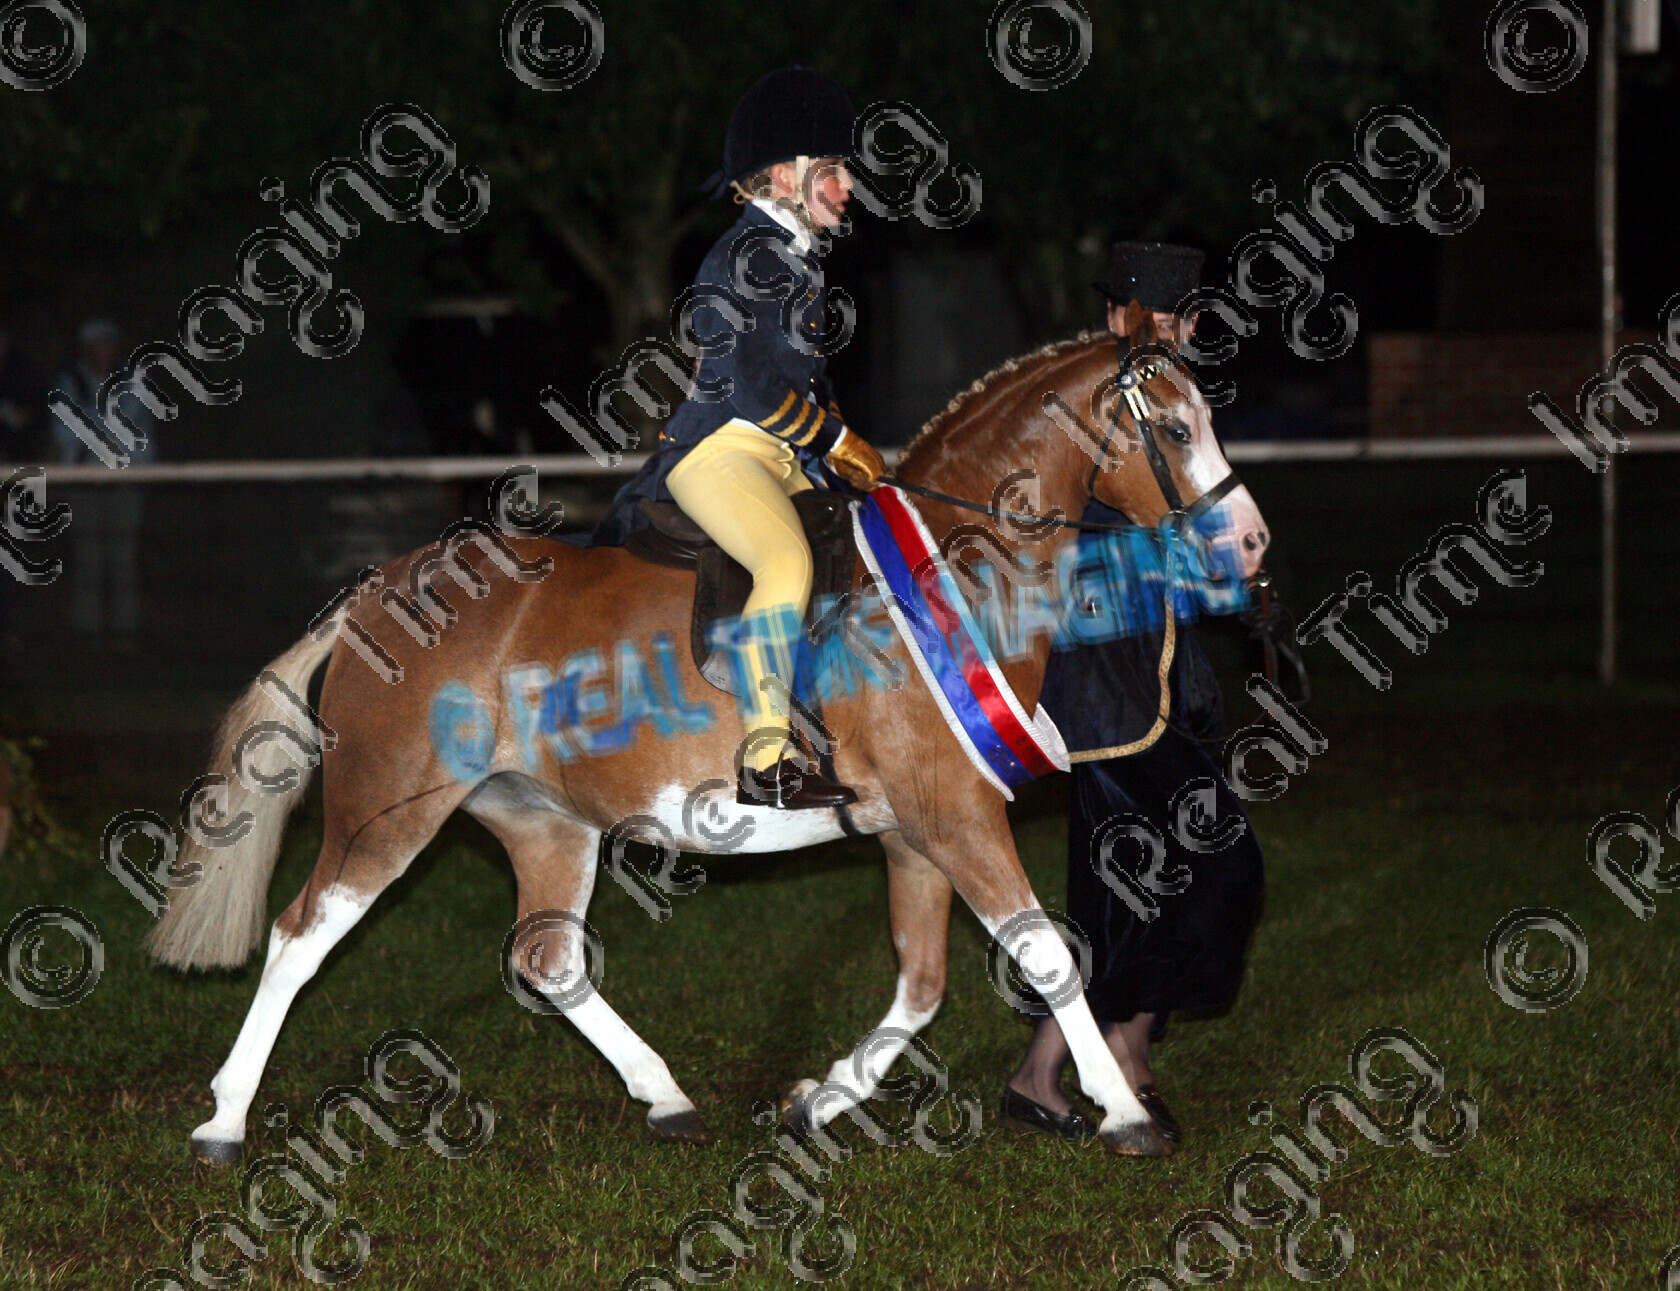 S06-50-12-147 
 Keywords: Ponies Association (UK) Summer Championship Show Supreme Concours D"Elegance Champion child rider sash rosette rosettes trotting trot moving action 447 Chiddock Talk Of The Town ridden by Megan Hewitt owned by Mrs W Hewit evening performance